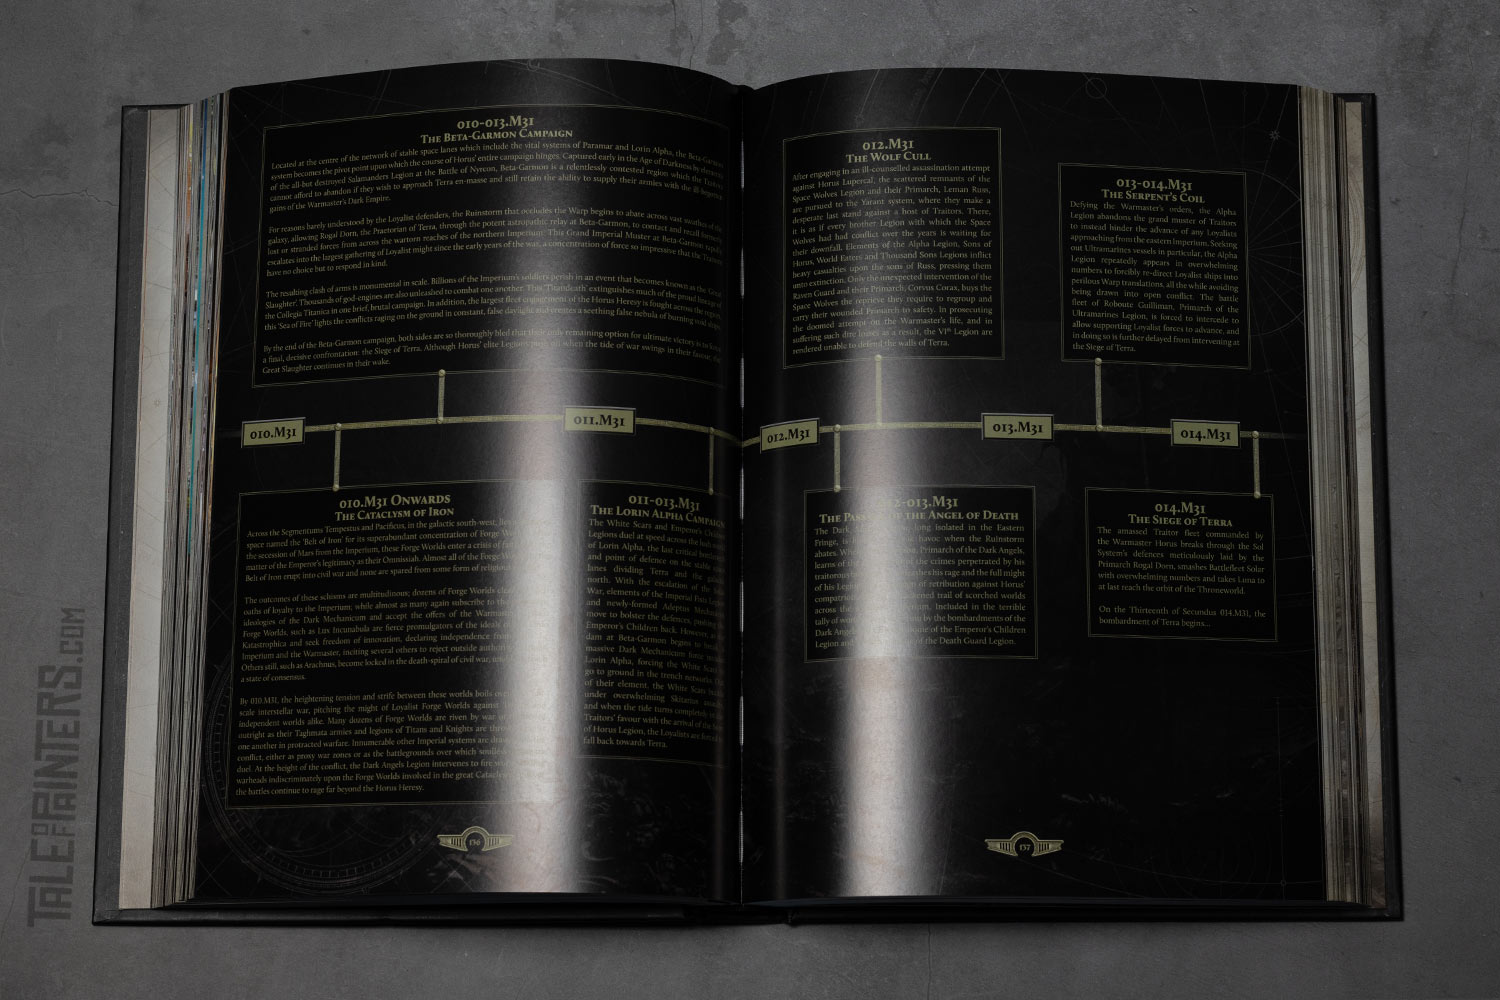 The Horus Heresy Age of Darkness Rulebook timeline